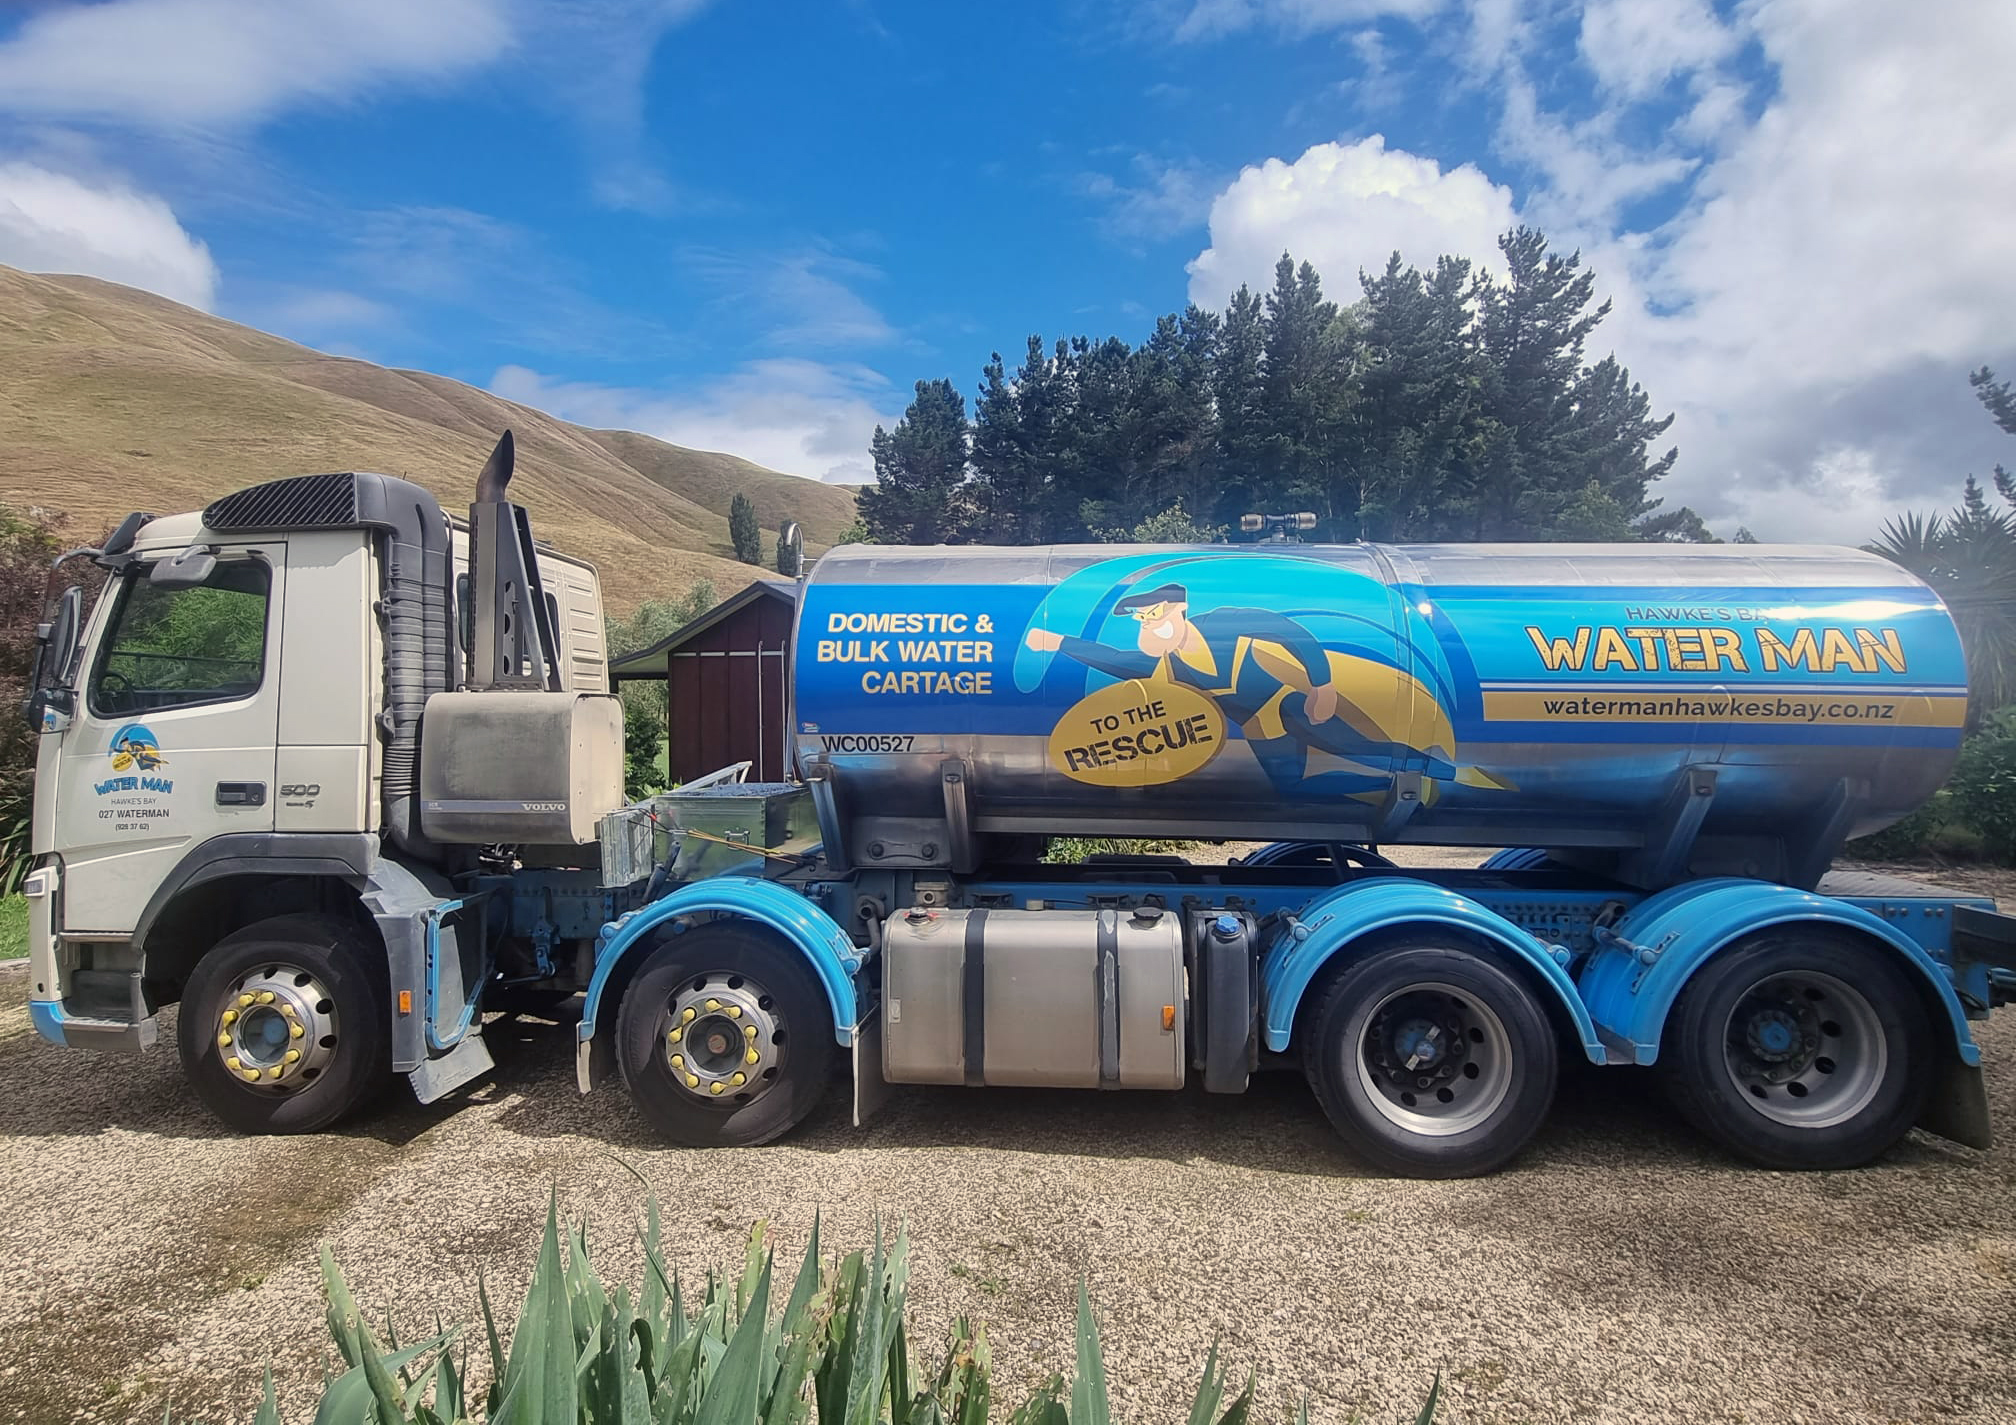 Water tanker water delivery truck